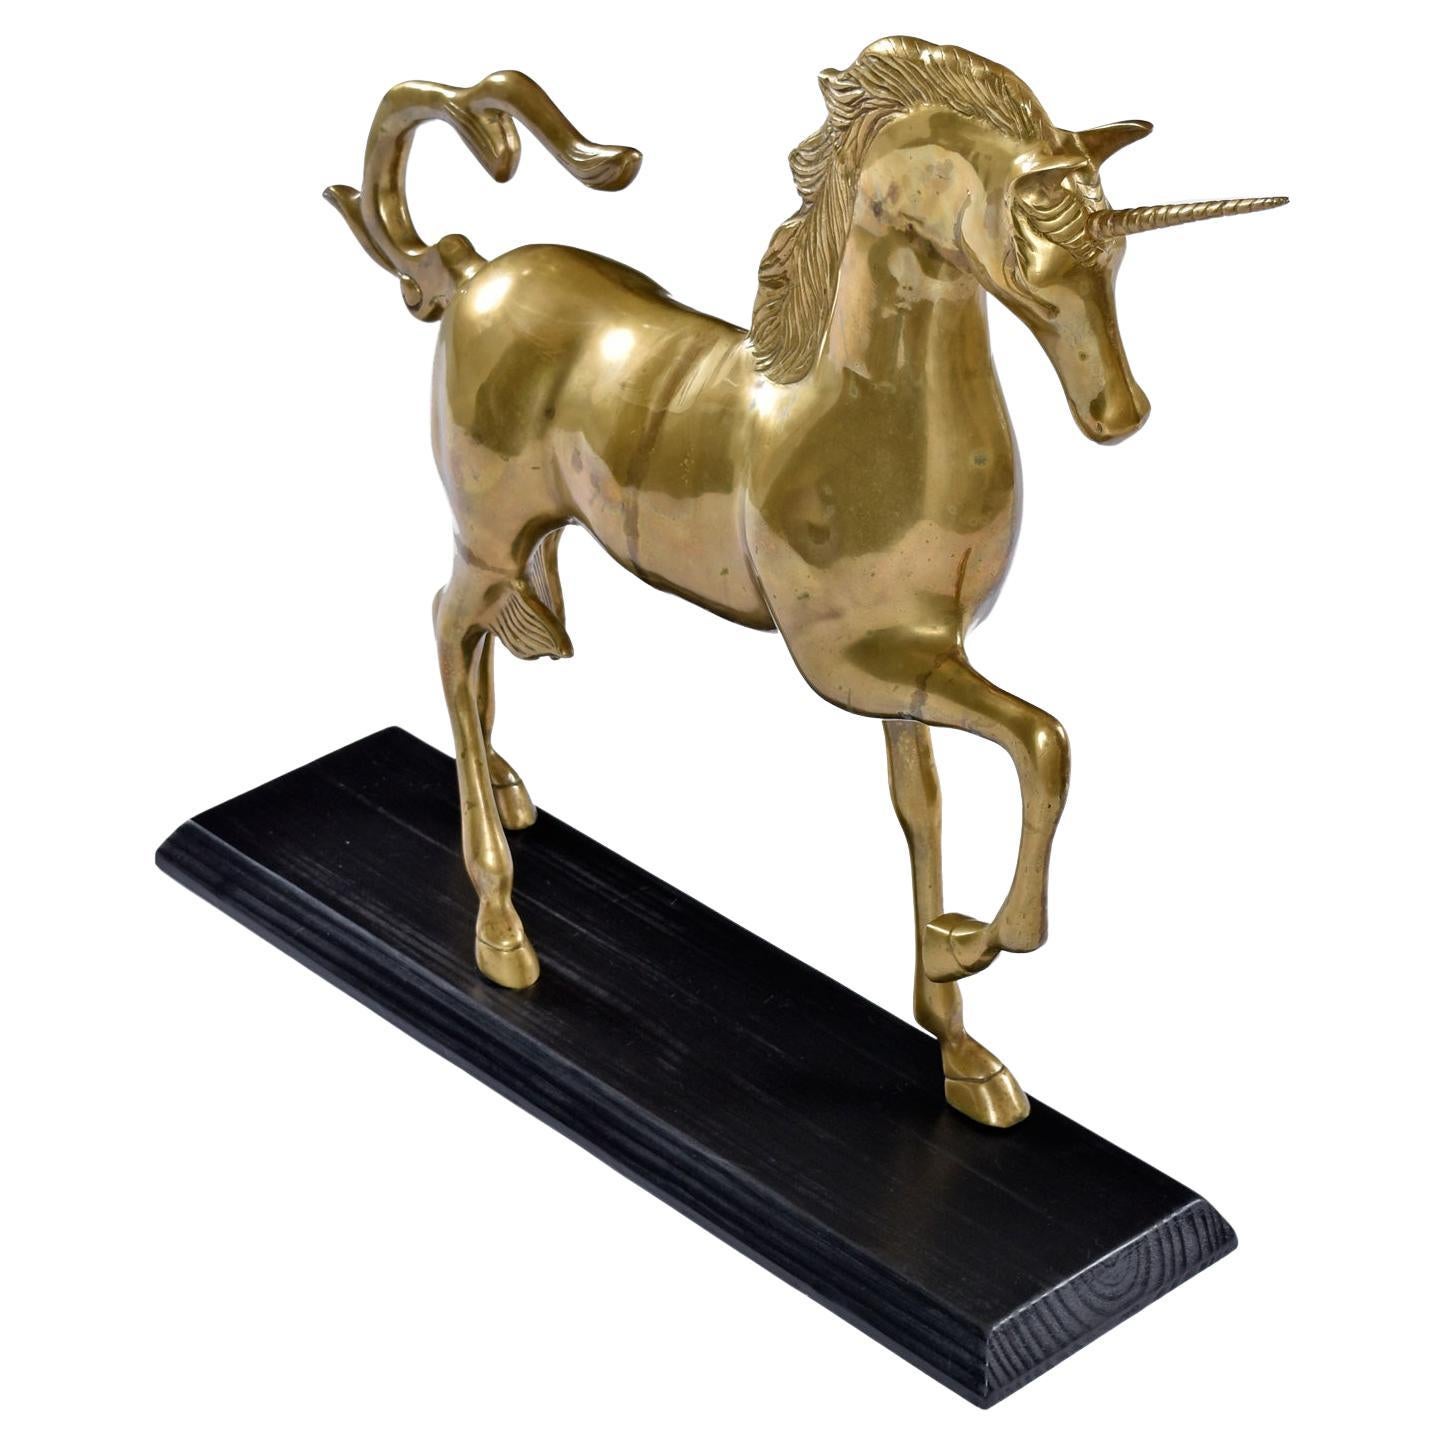 Monumental 1970s Decorative Hollywood Regency Solid Brass Unicorn Horse In Good Condition For Sale In Chattanooga, TN